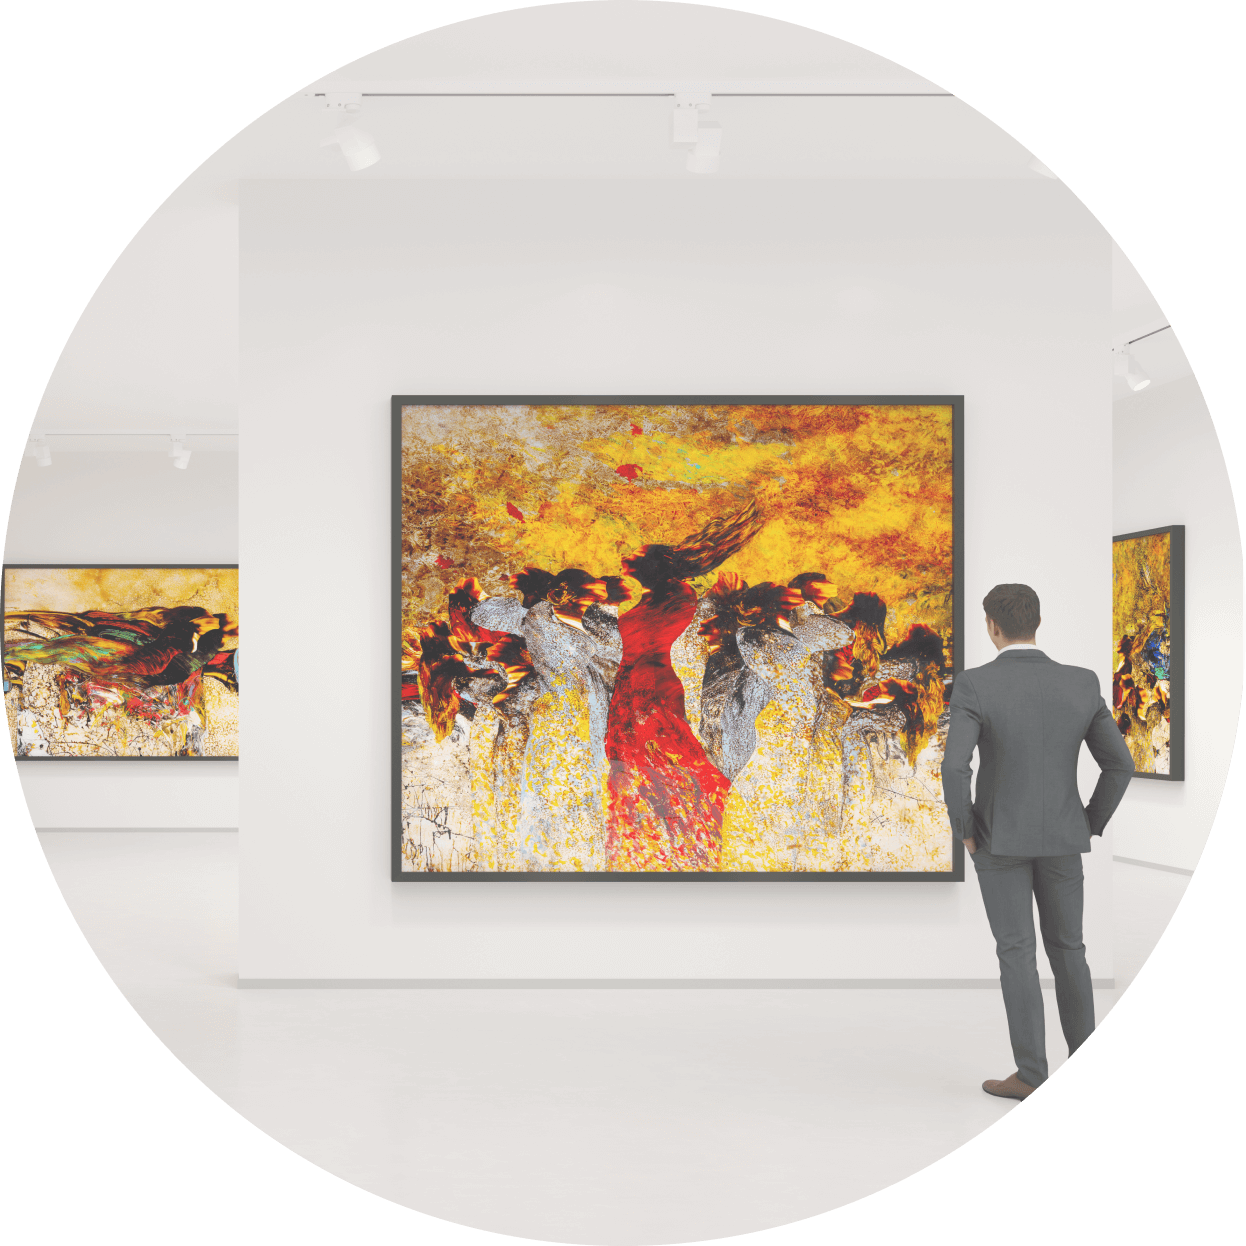 Man looking at a painting in at an art gallery opening event. Collaborate with a Specialist Events Production team who will create a successful Hybrid event combining Live Event Production with Virtual Event Management: CODA Communications